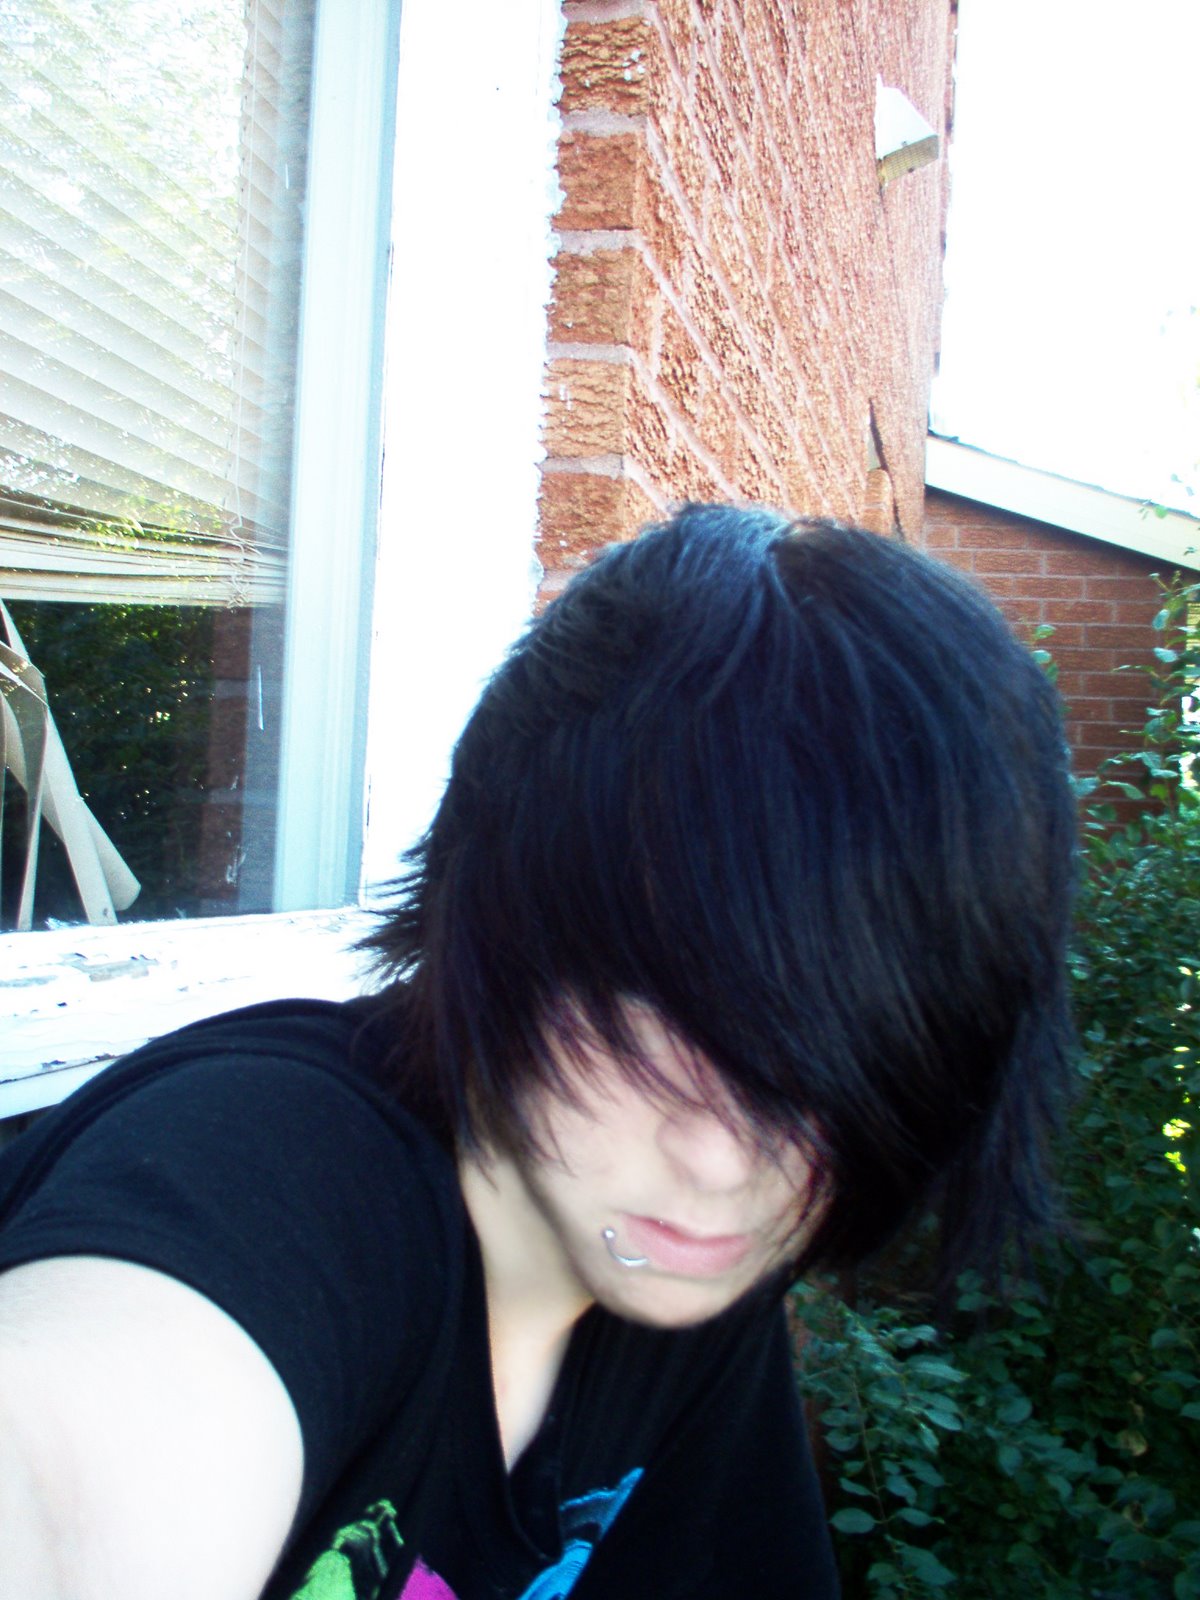  Emo  Hair Emo Hairstyles  Emo  Haircuts The popularity 